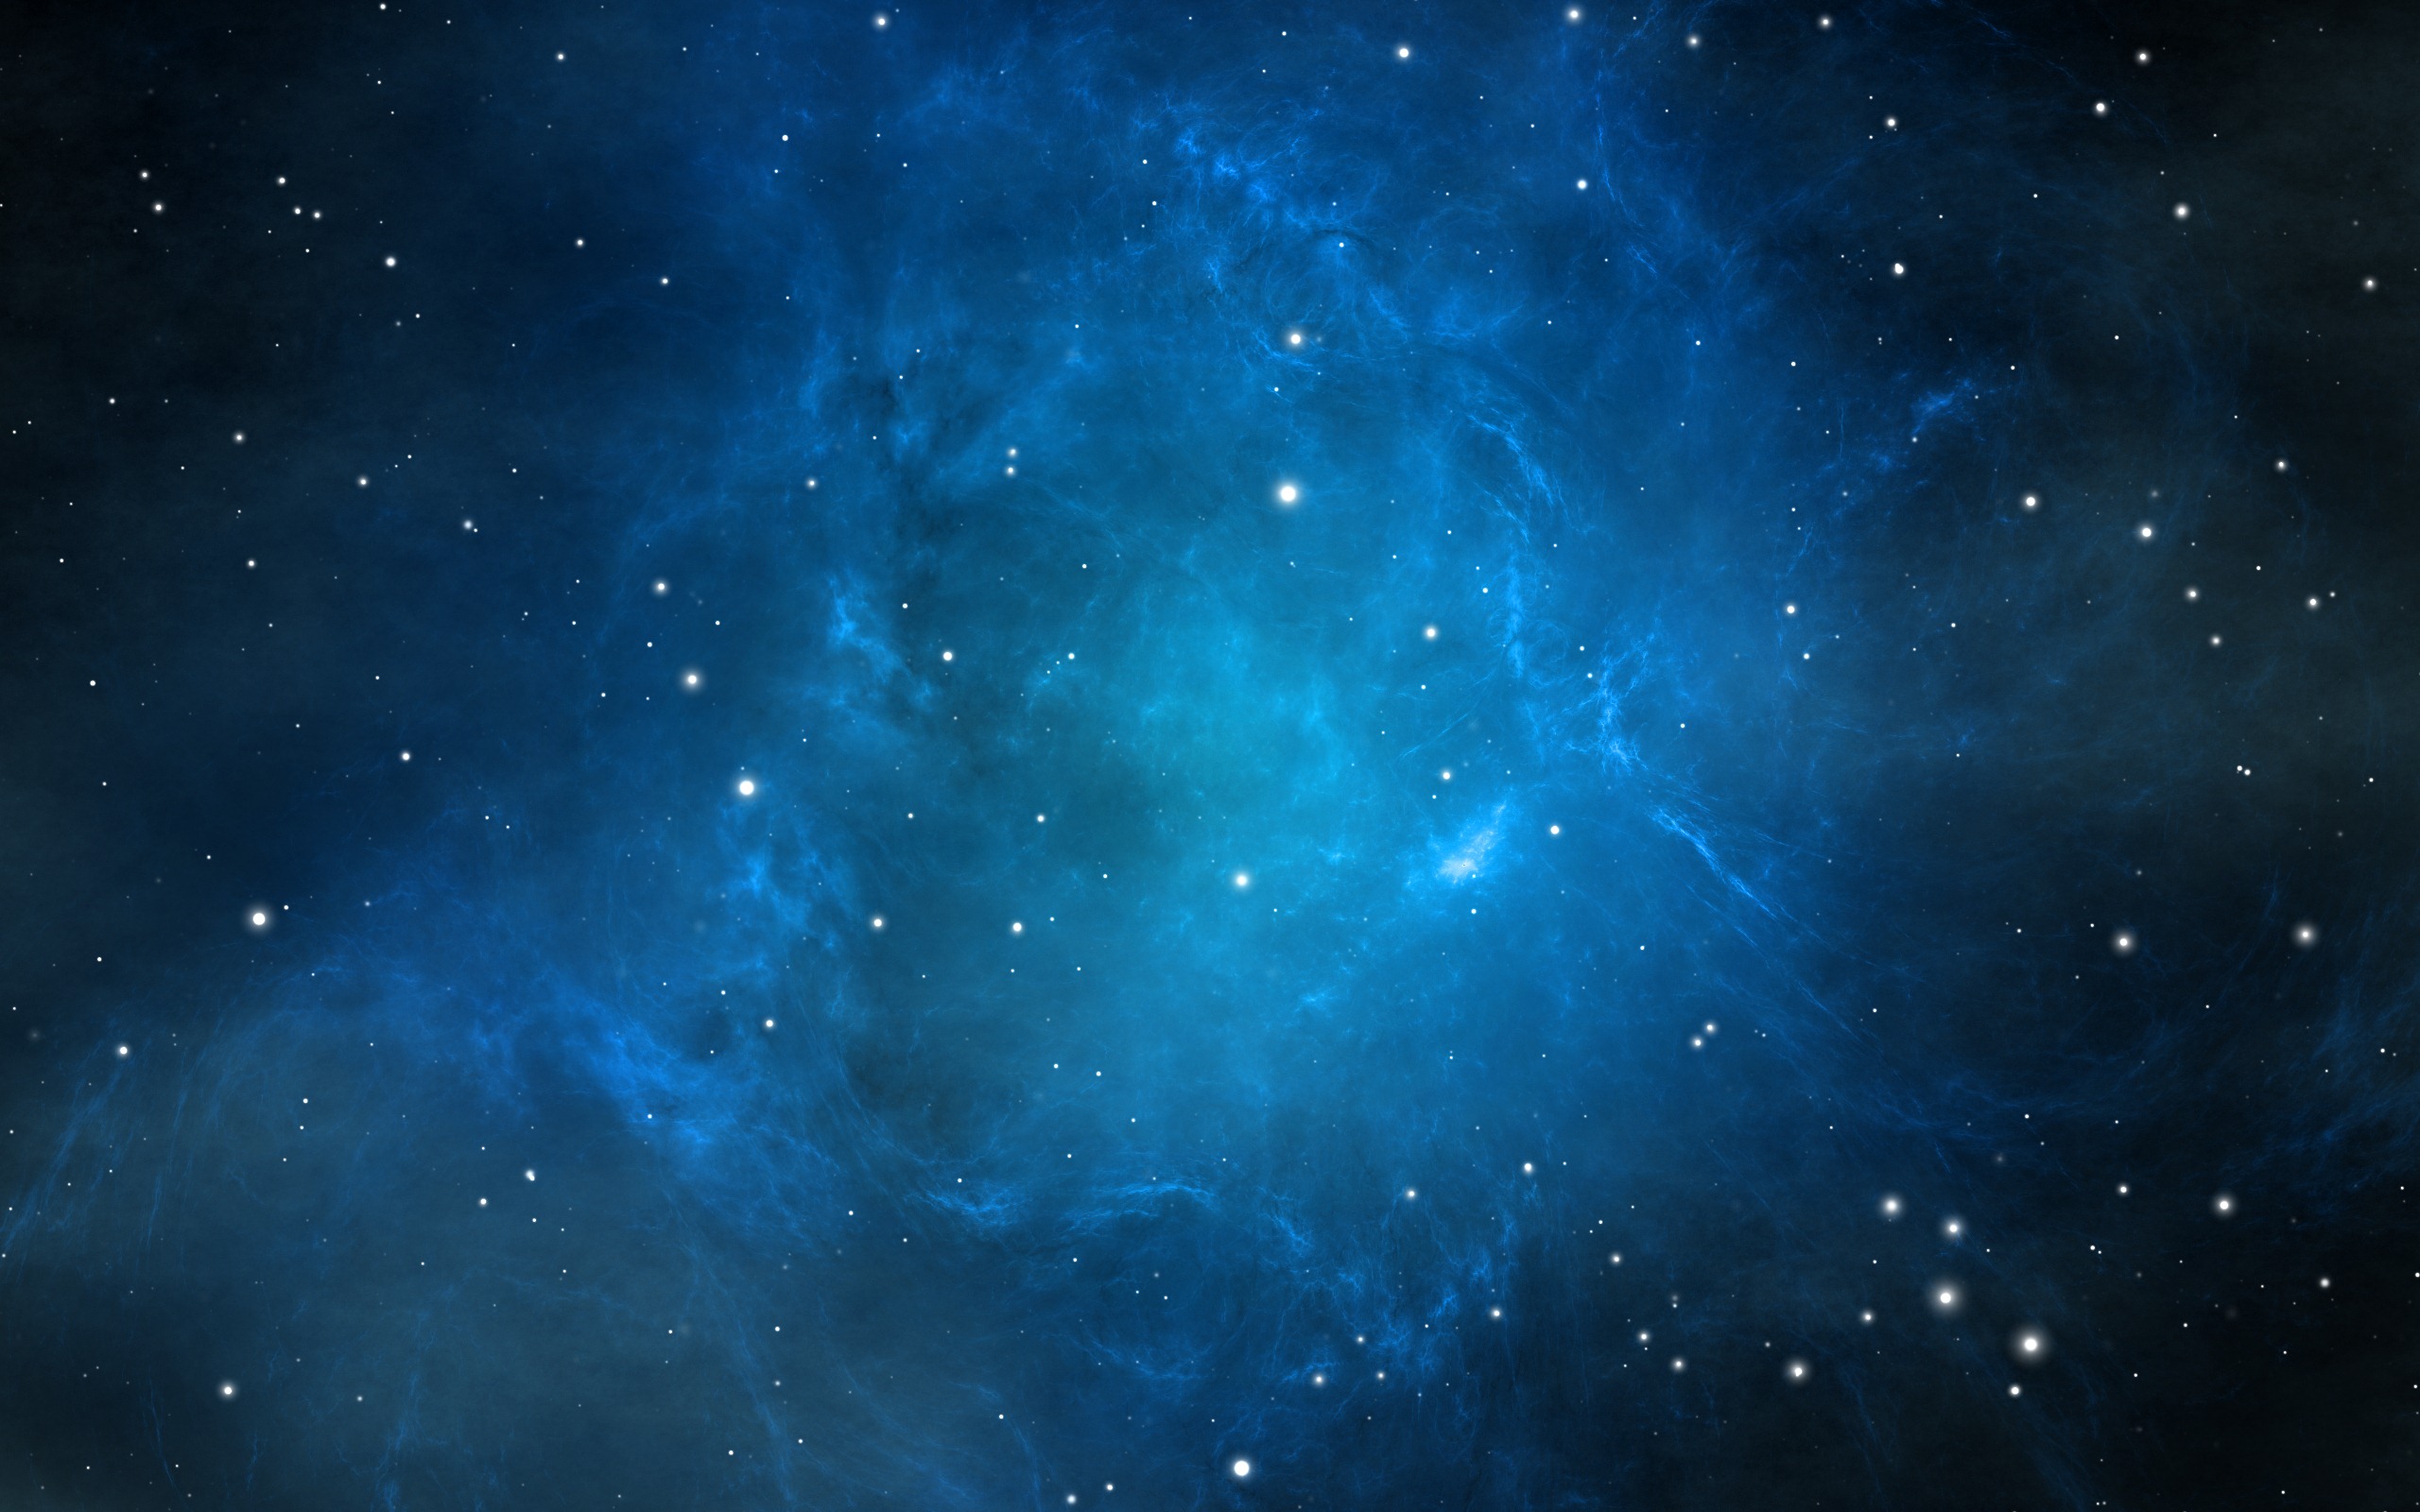 Wallpaper Blue and White Galaxy Illustration, Background Free Image